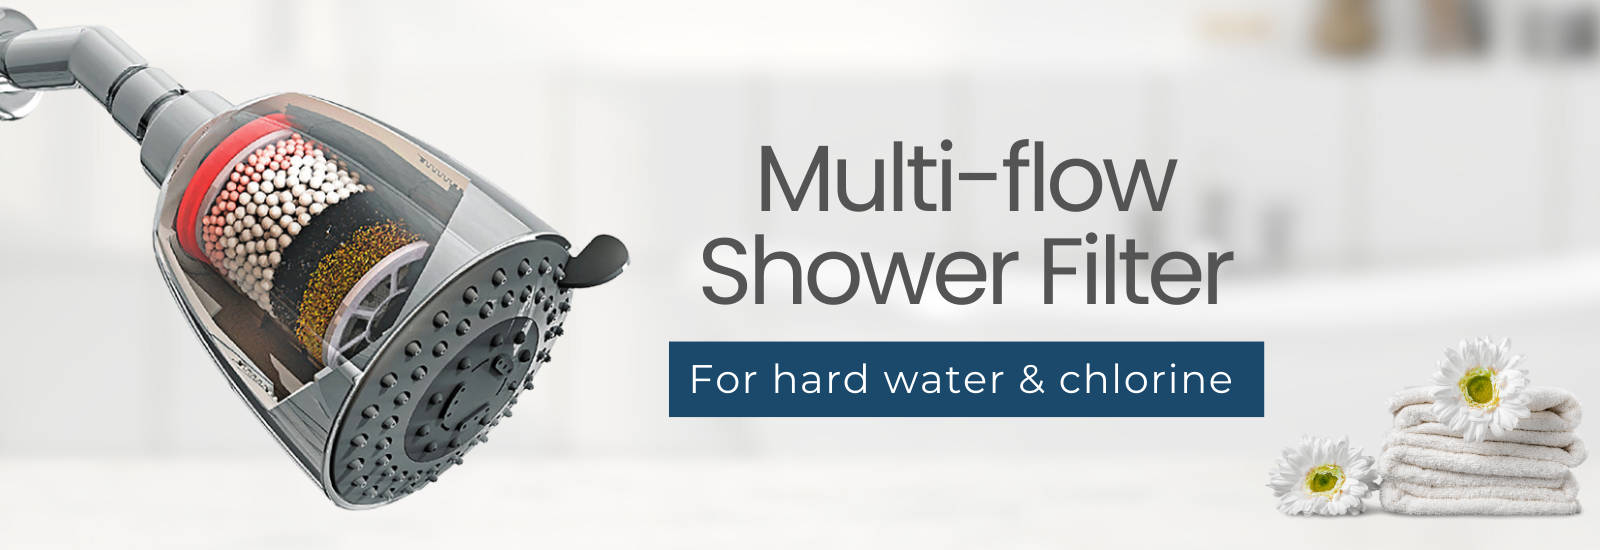 CLEO Multi Flow Shower Filter for Hard Water - Hard Water Shower Filter –  WaterScience